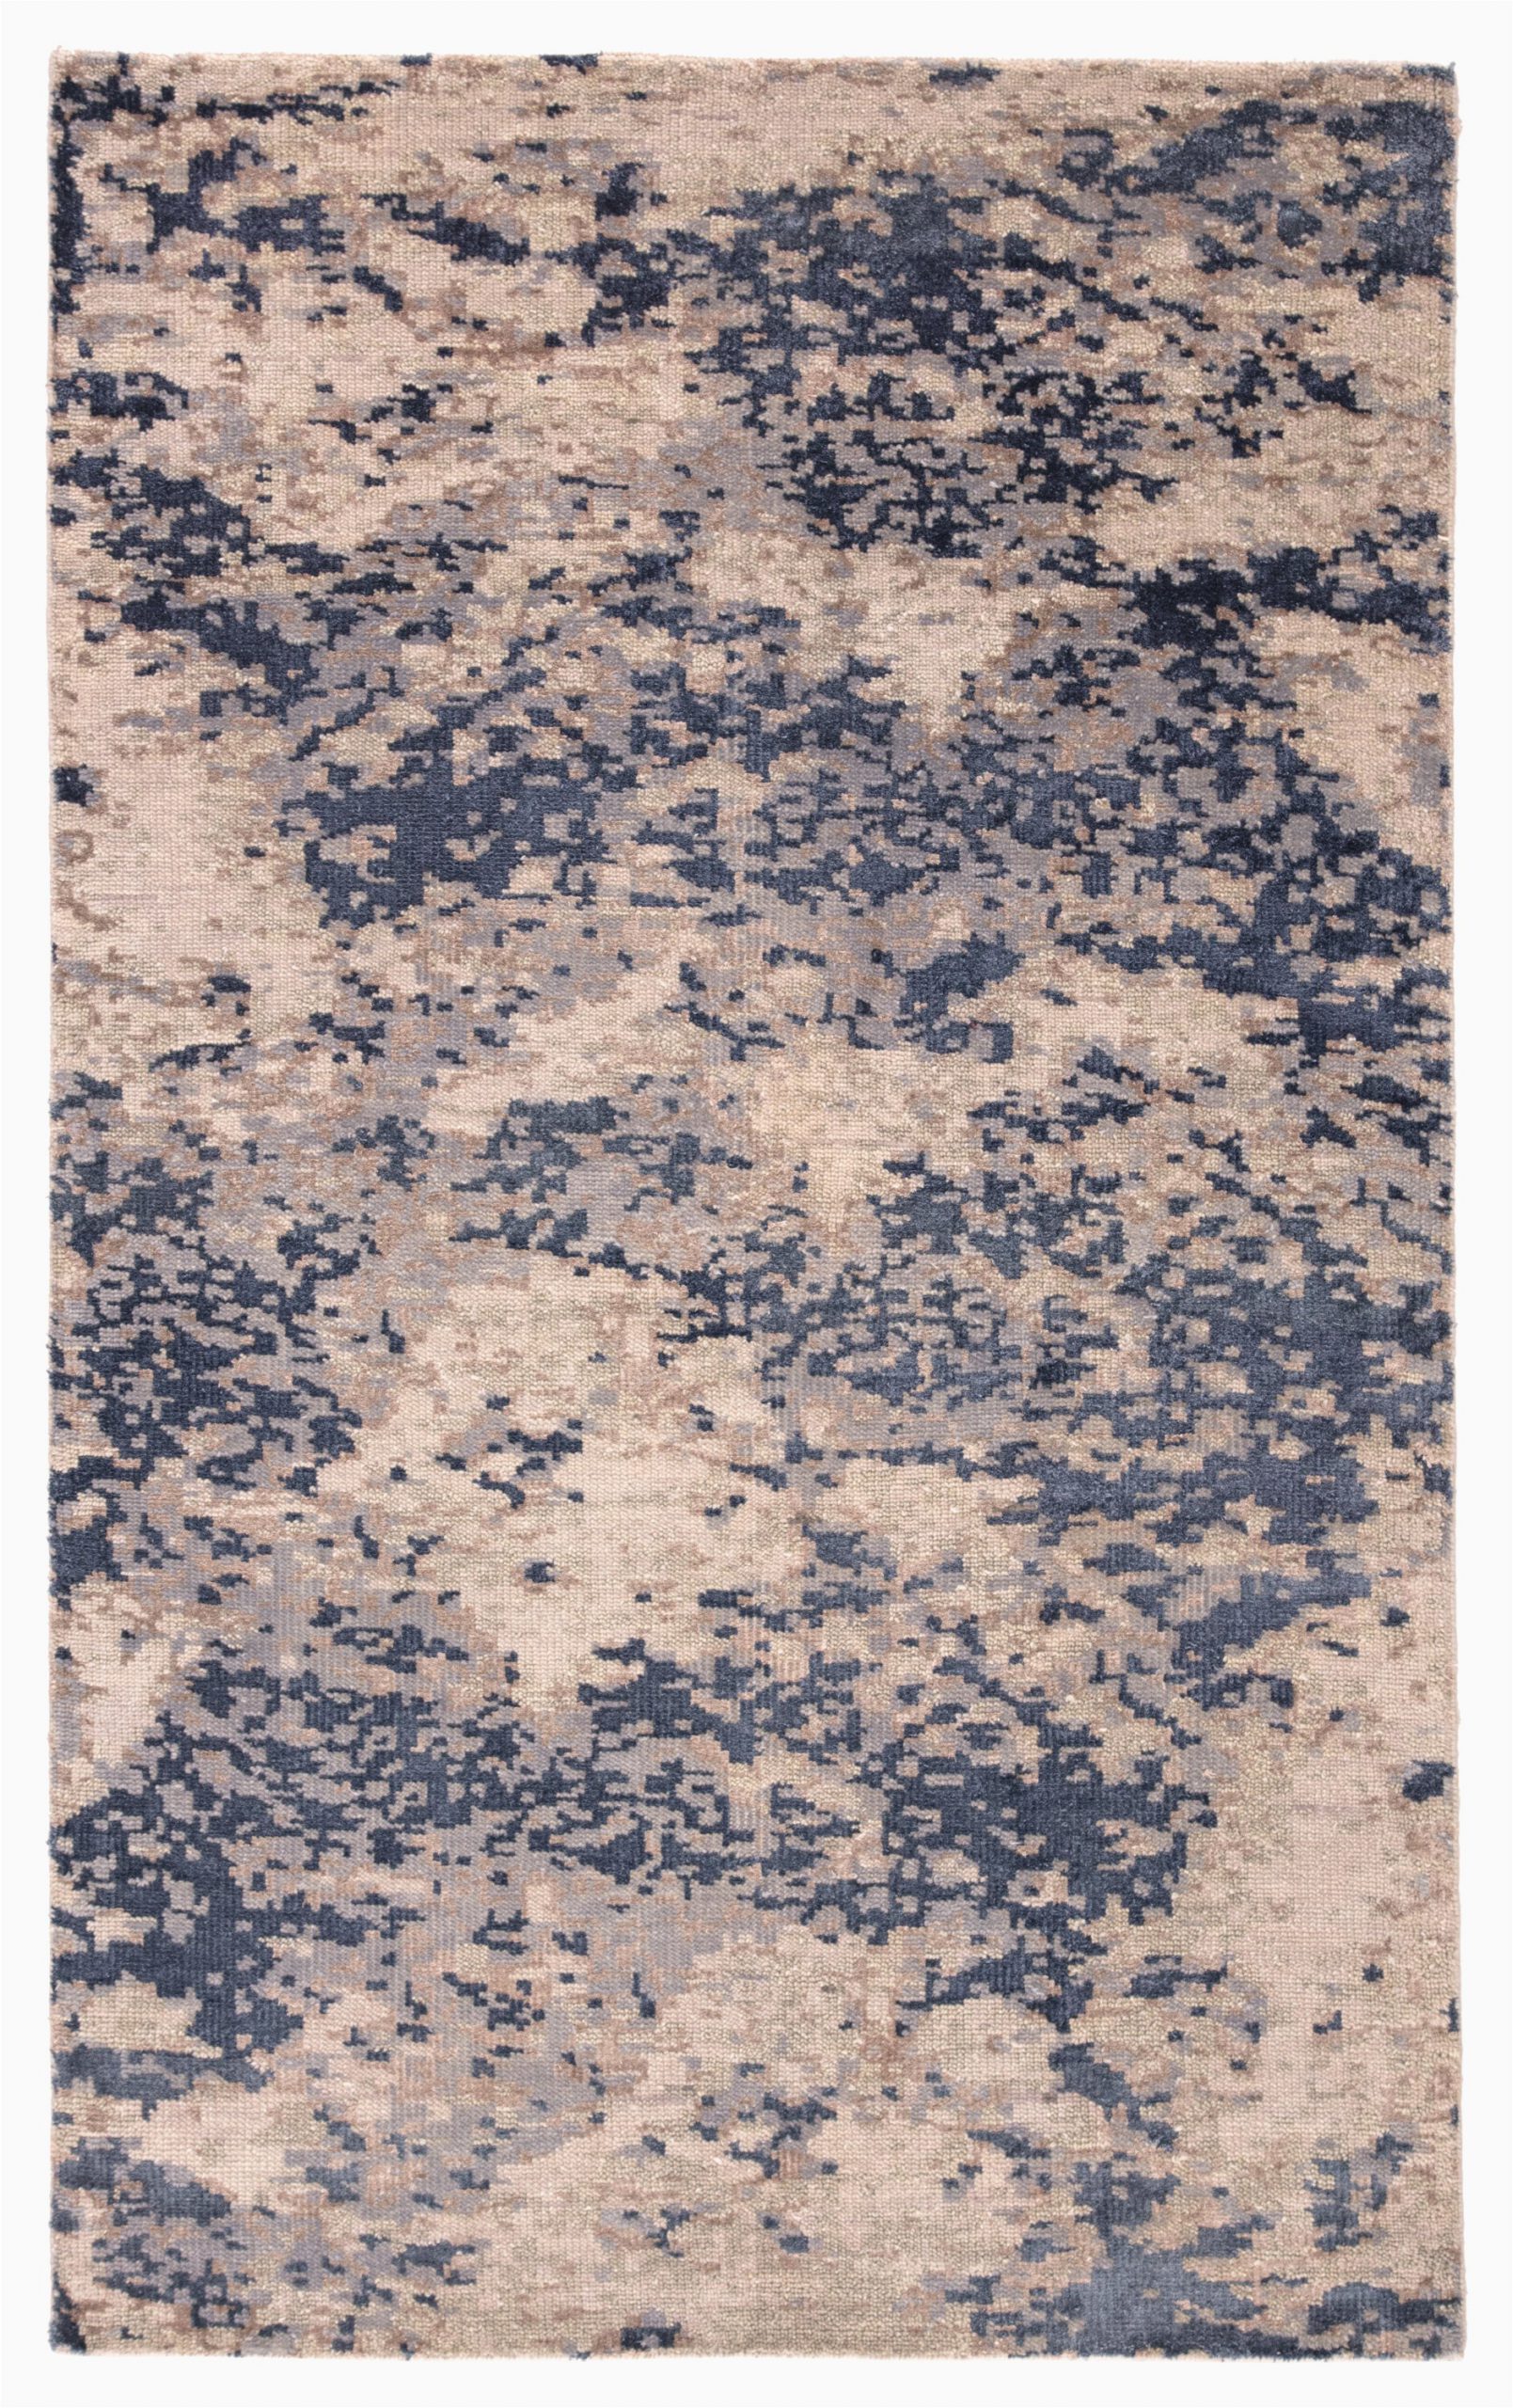 Artisan De Luxe Home area Rugs Kavita Abstract Hand Knotted Blue area Rug